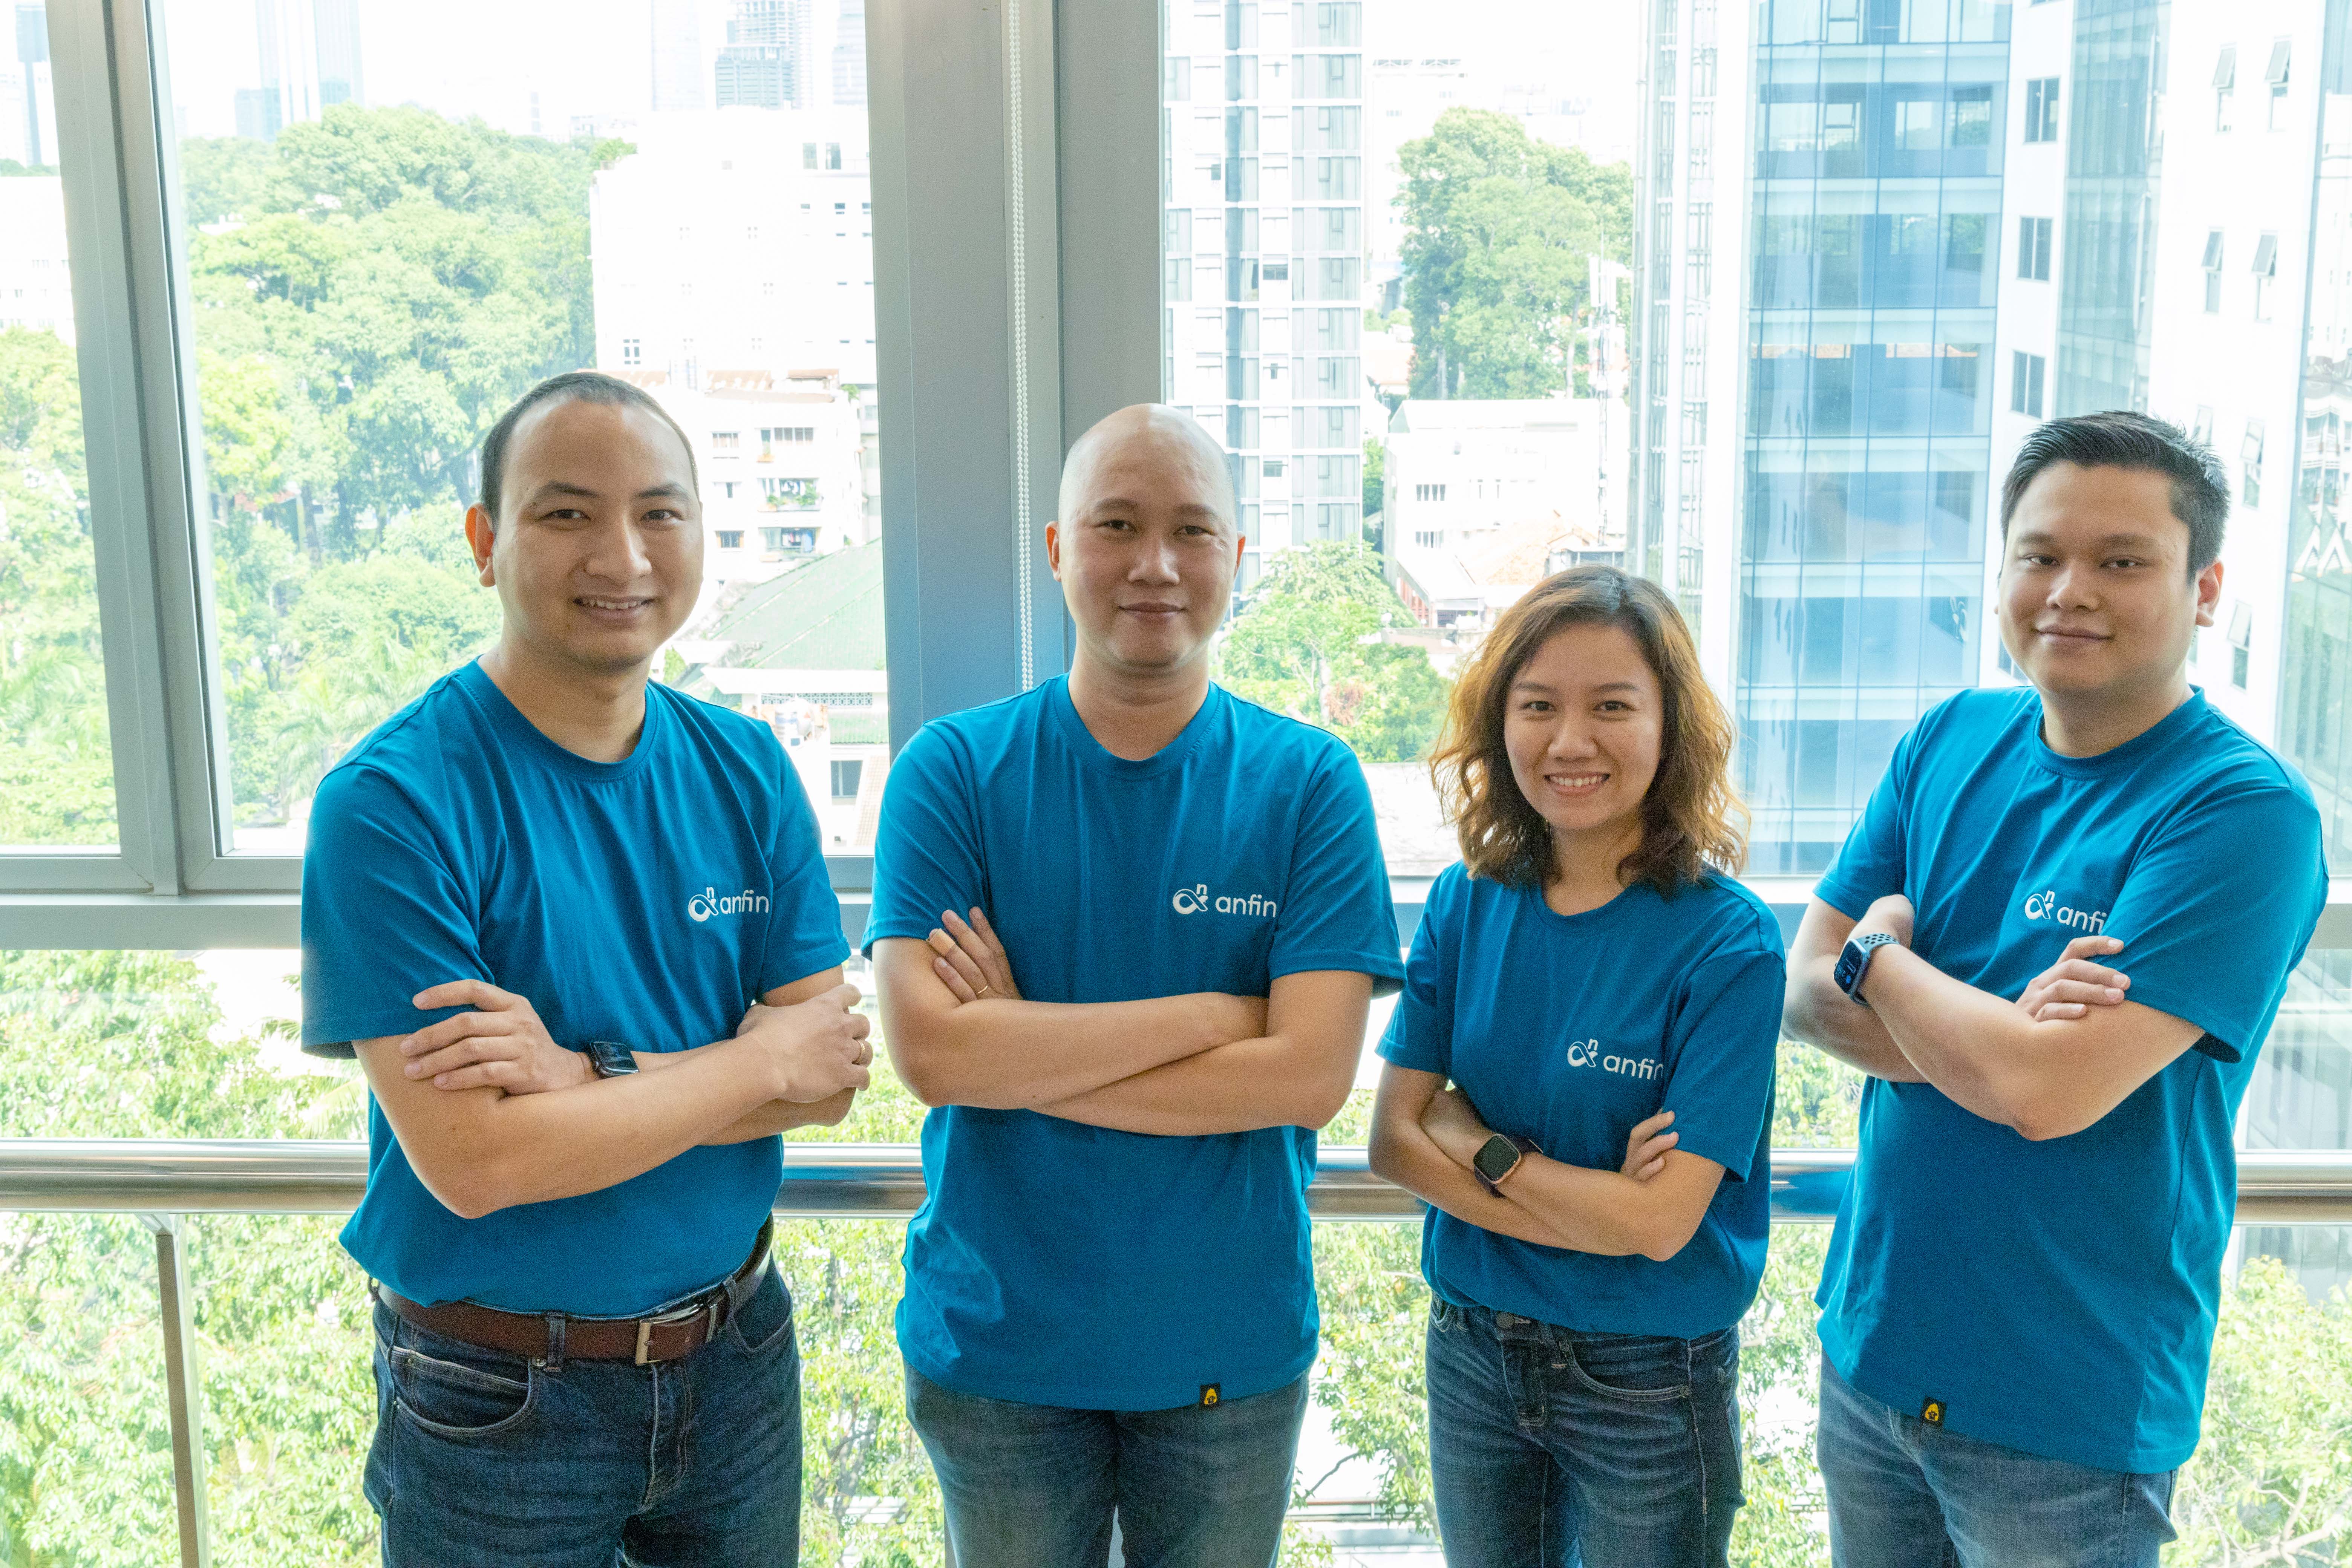 Anfin founders Hiep Nguyen, Phuoc Tran, Chi Pham and Michael Do